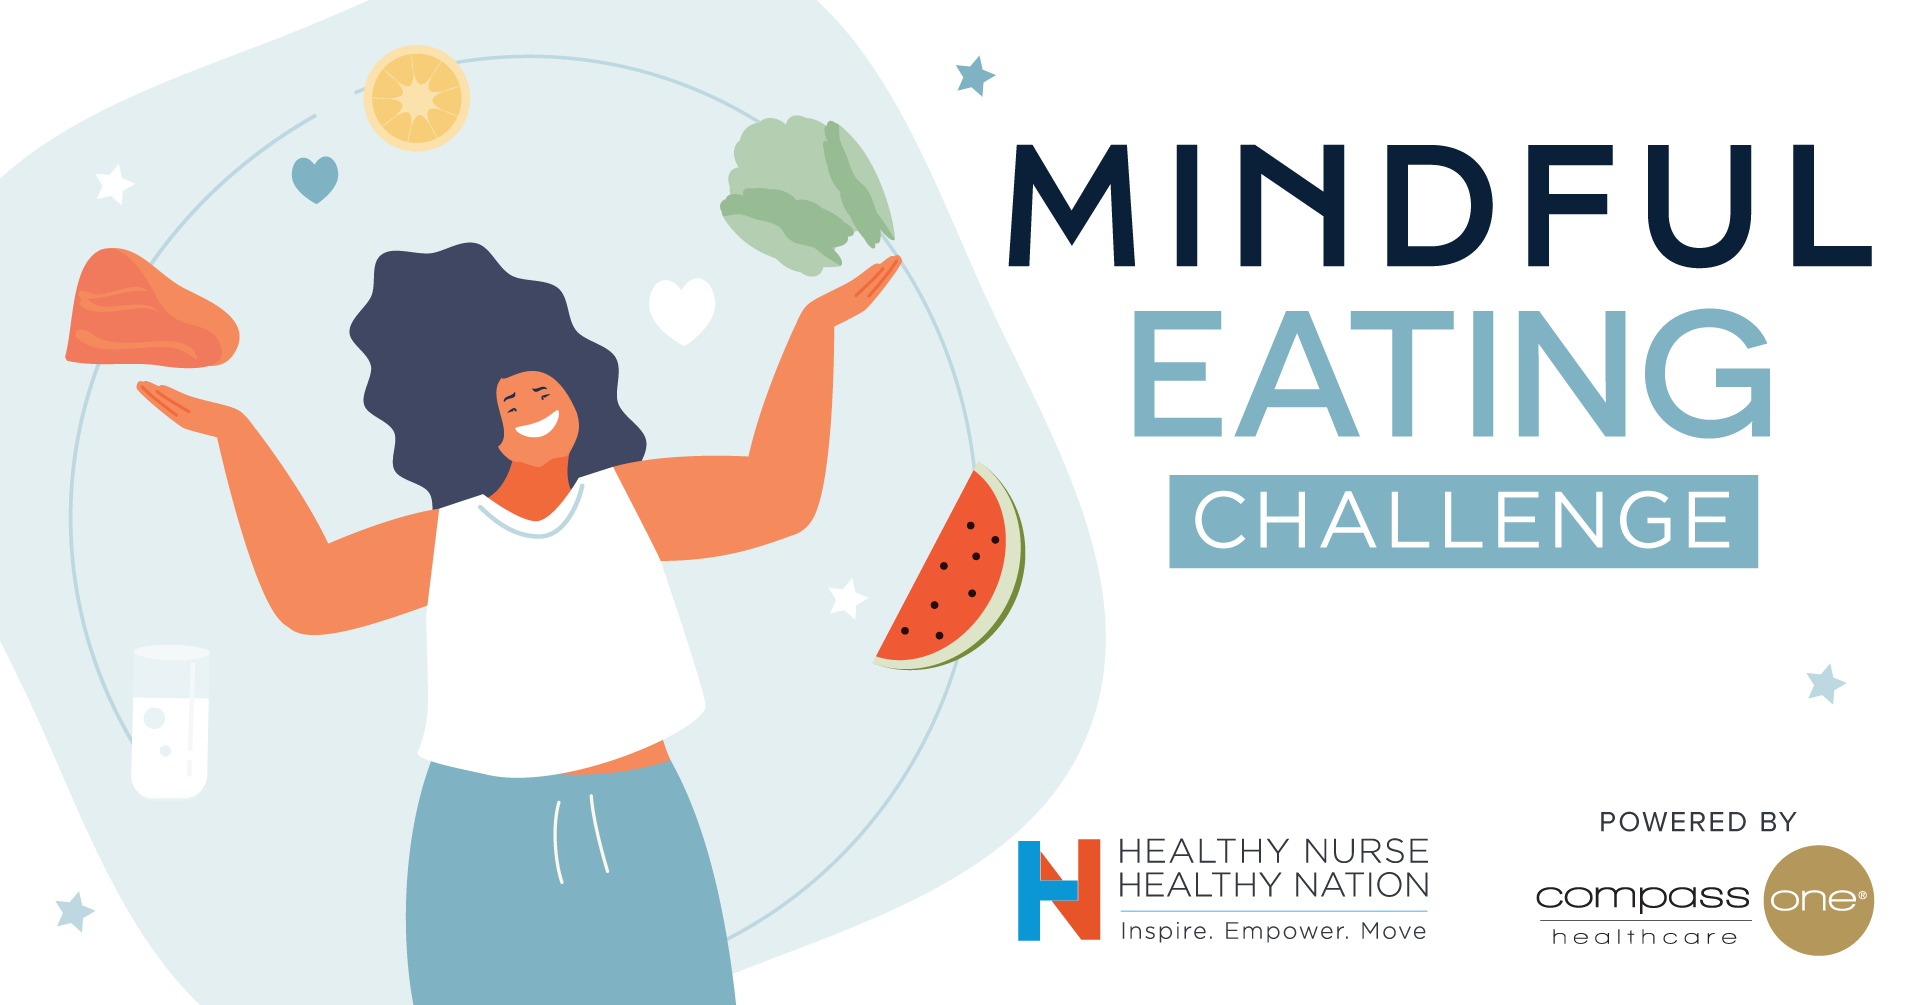 Unwind for Better Digestion - Mindful Eating, powered by Morrison Healthcare, a Division of Compass One Healthcare - Day 8 Tip 4696